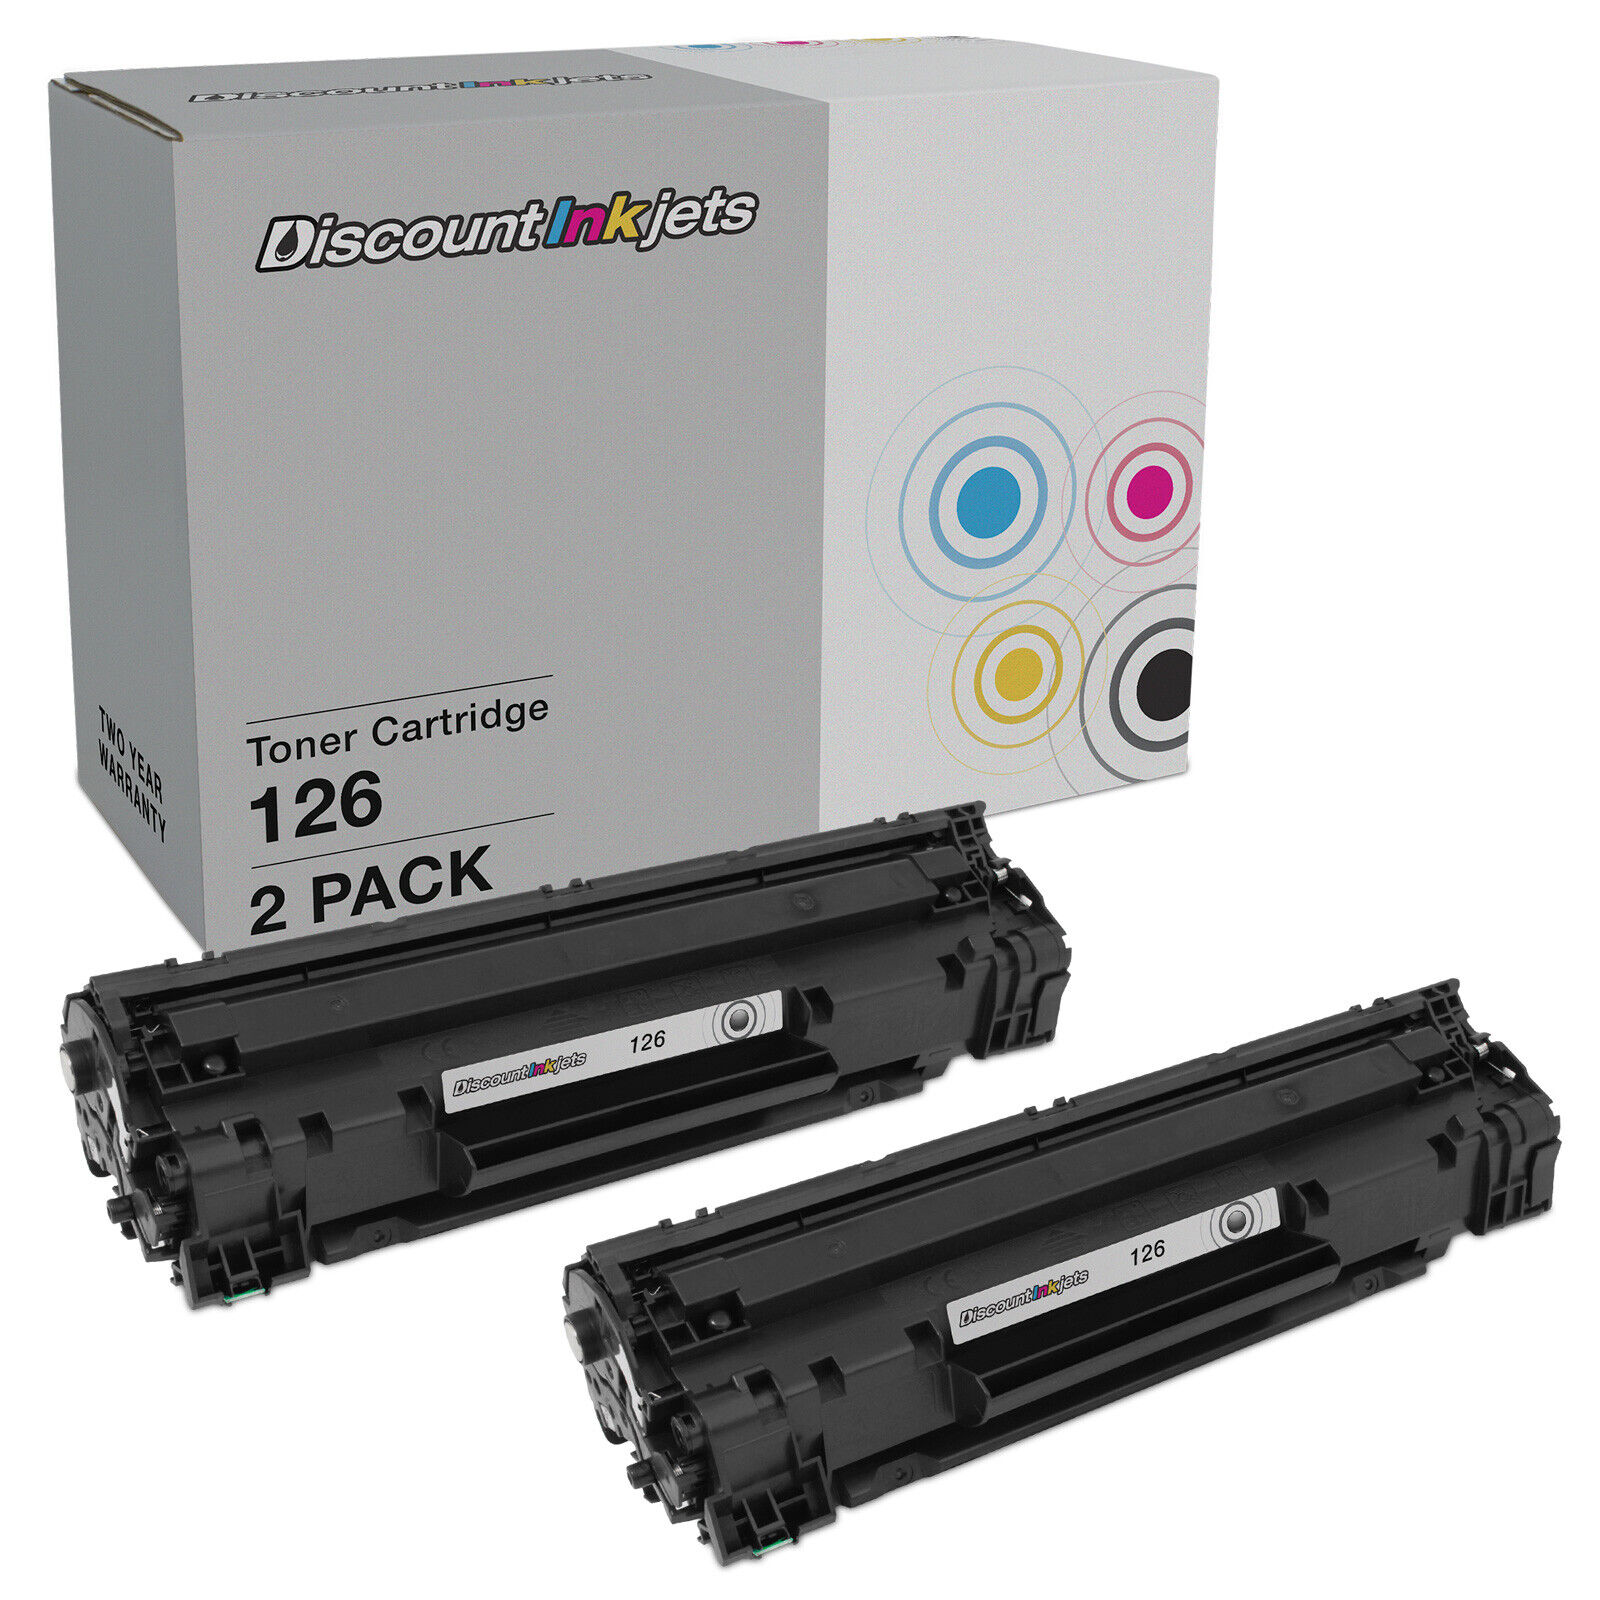 Compatible Toner Cartridge Replacements for Canon 126 (Black, 2-Pack)